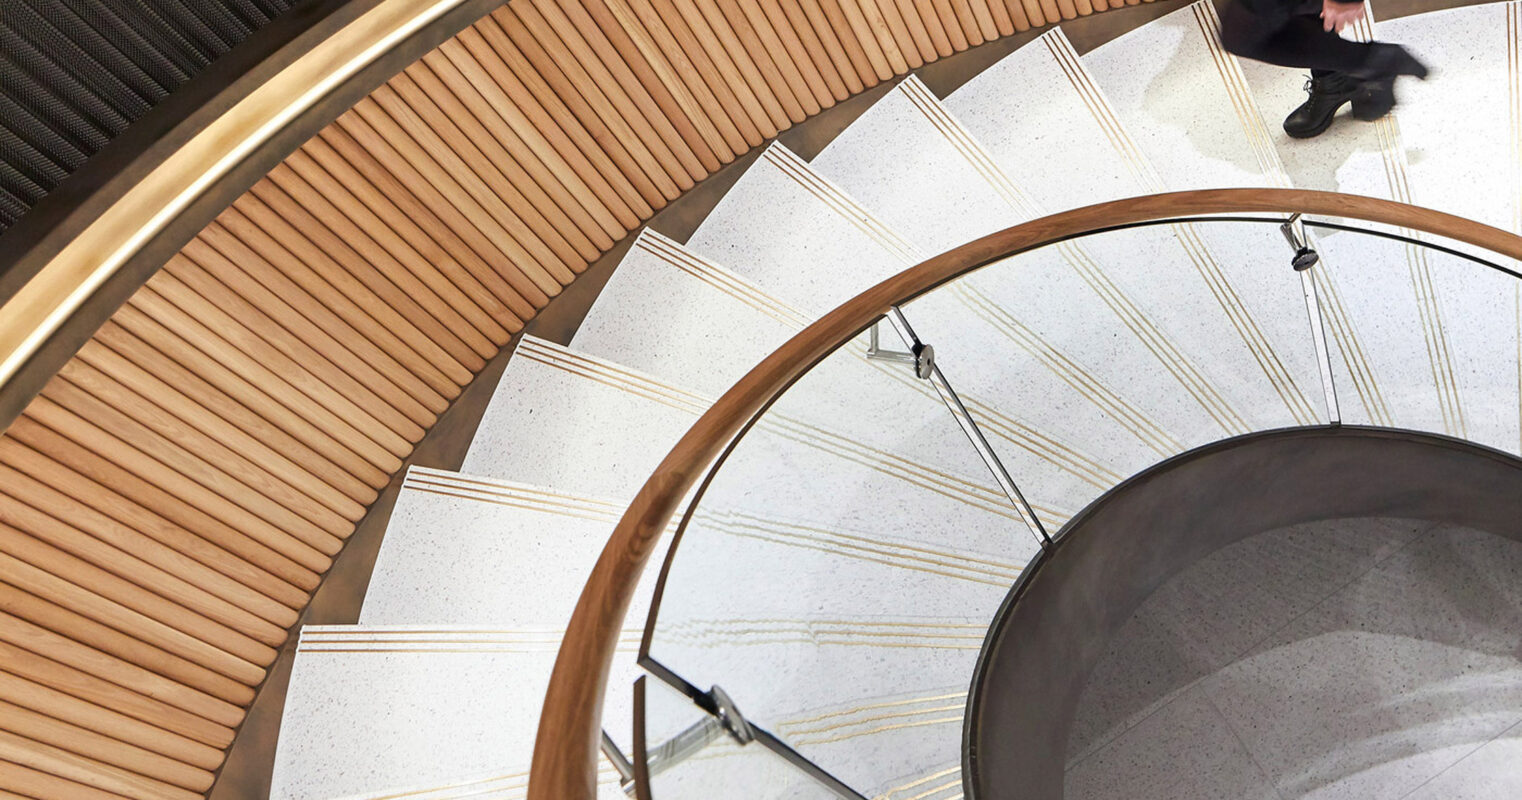 Elegant spiral staircase with warm wooden balustrades, contrasting the cool, grey tones of stone steps. A woman interacts with the fluid design, highlighting the staircase’s function and seamless integration within the space.